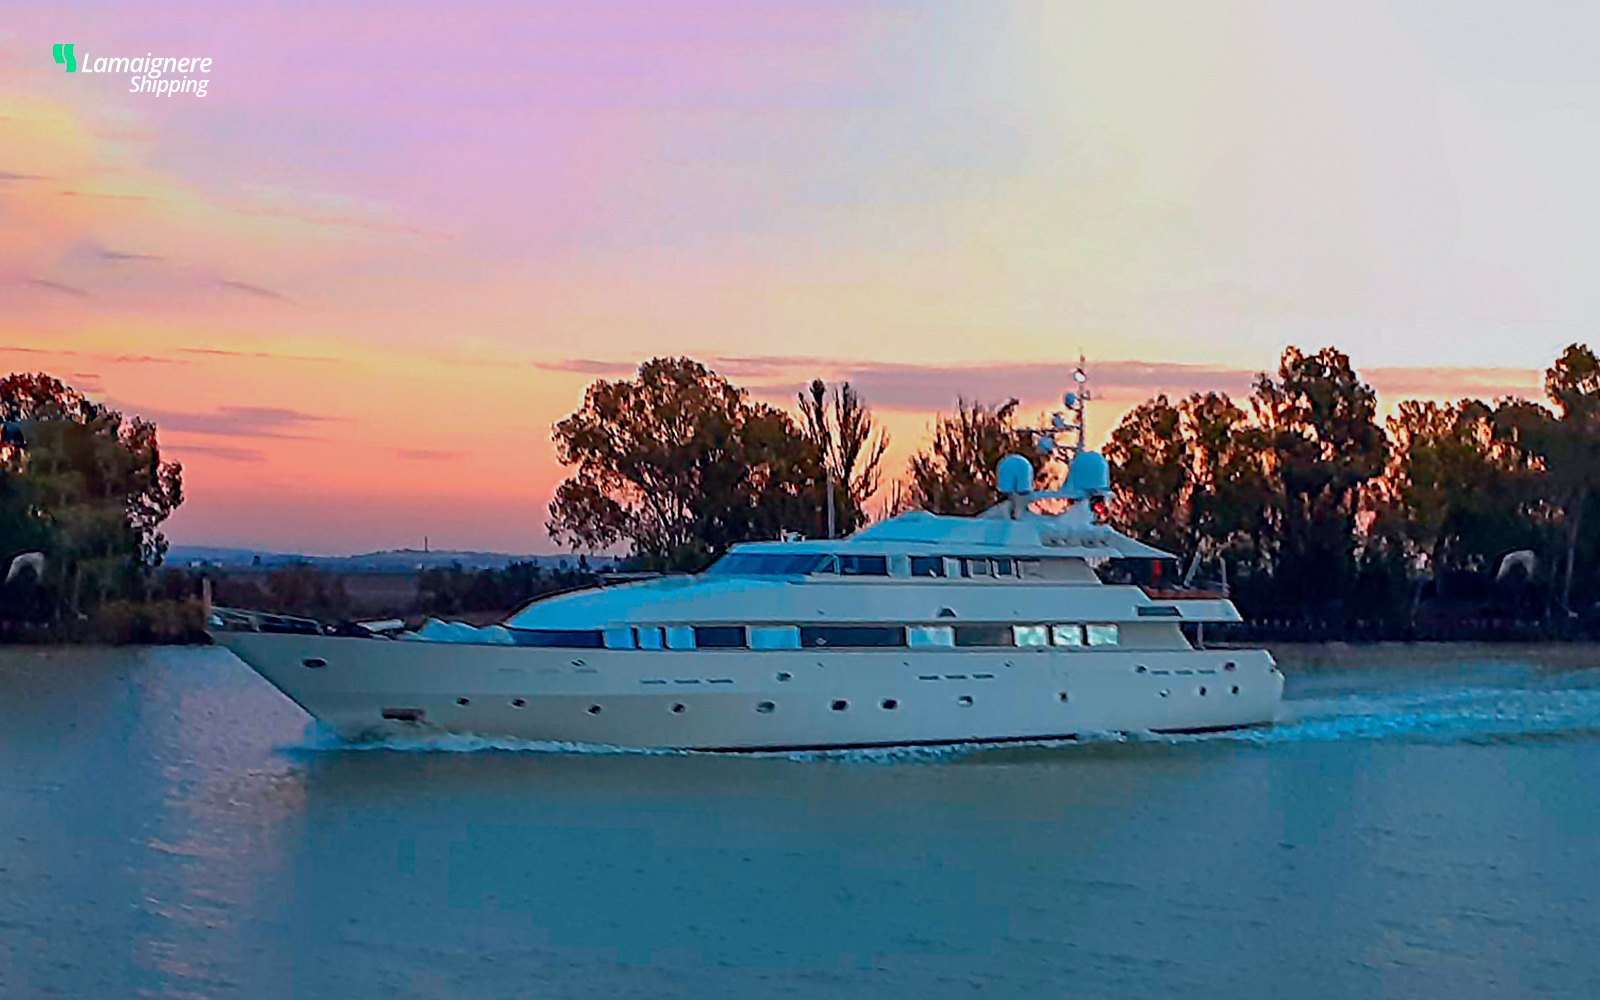 Lamaignere Shipping provides several days agent services to the yacht “Dream” in different points of Andalusia.